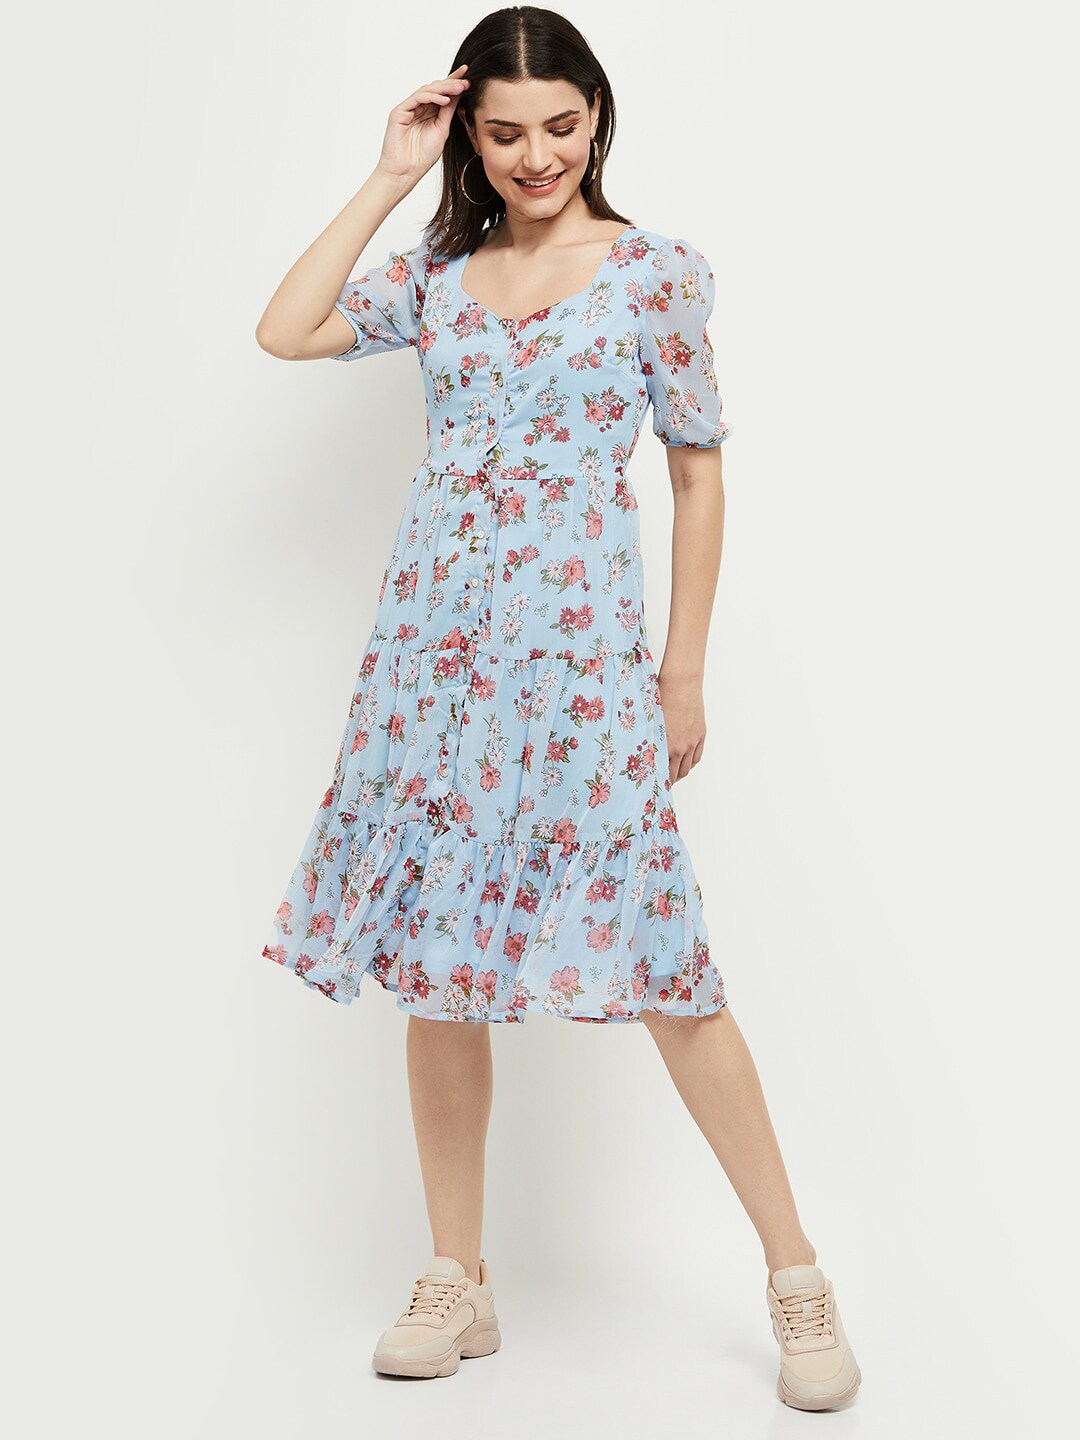 max Women Blue Floral Printed A-Line Dress Price in India